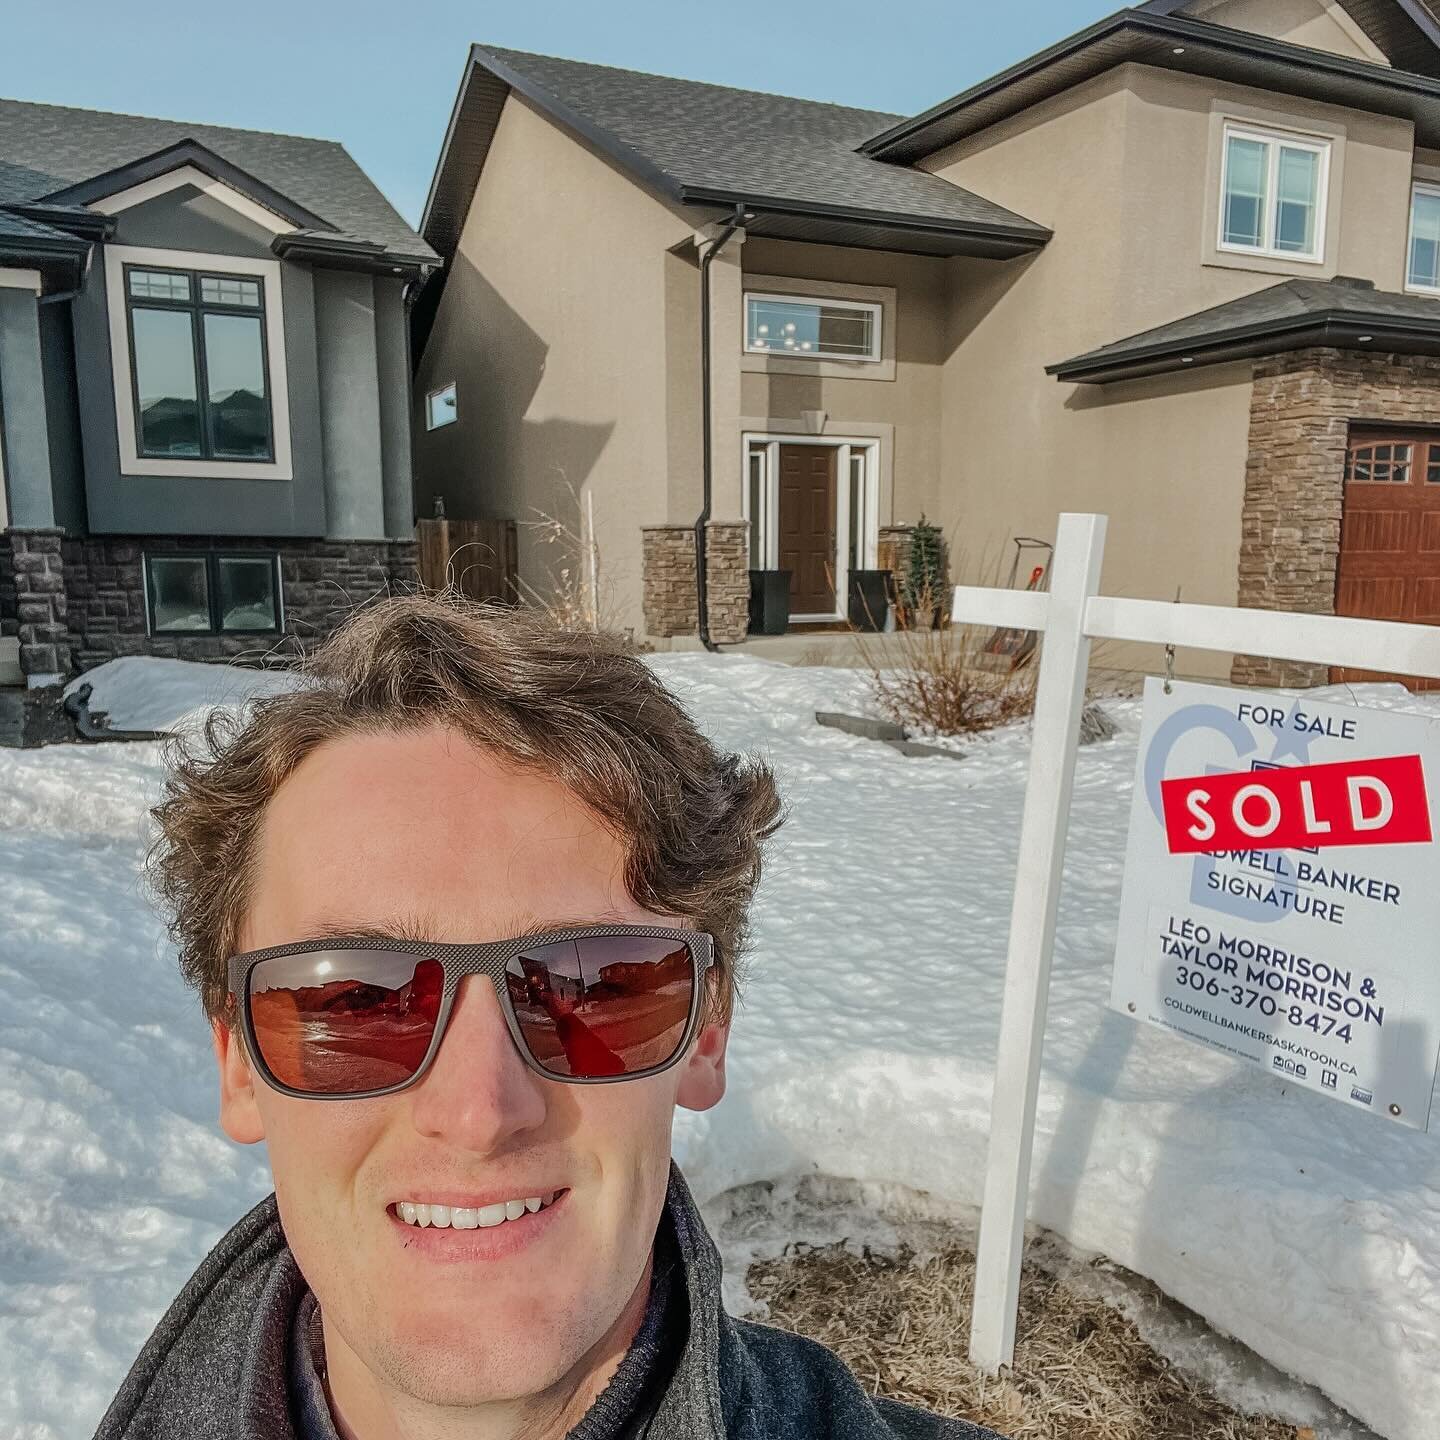 SOLD - We helped our sellers secure over $25,000 above their asking price. Over 8 offers, negotiations and a back up offer.

Hope everyone soaked up the sun this weekend! ☀️